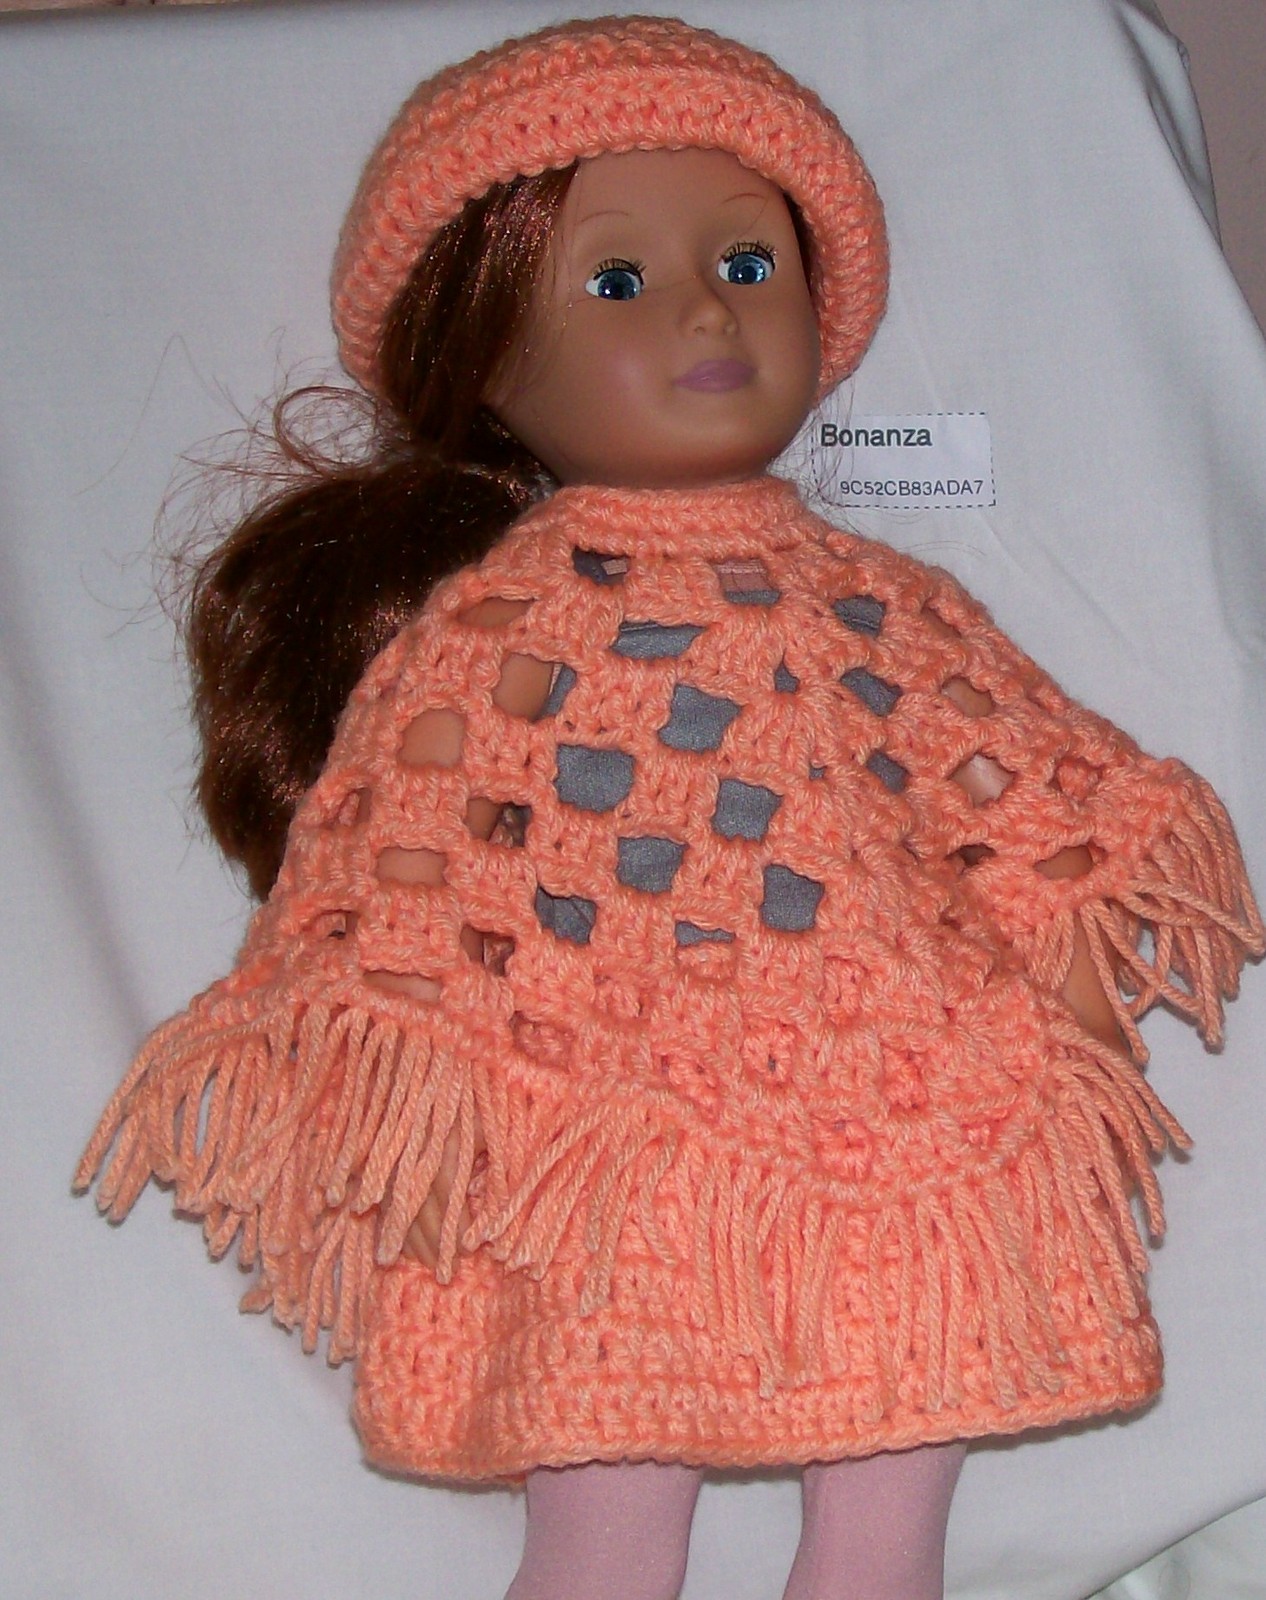 Primary image for American Girl Peach Poncho and Brimmed Hat, Crochet, 18 Inch Doll, Handmade 